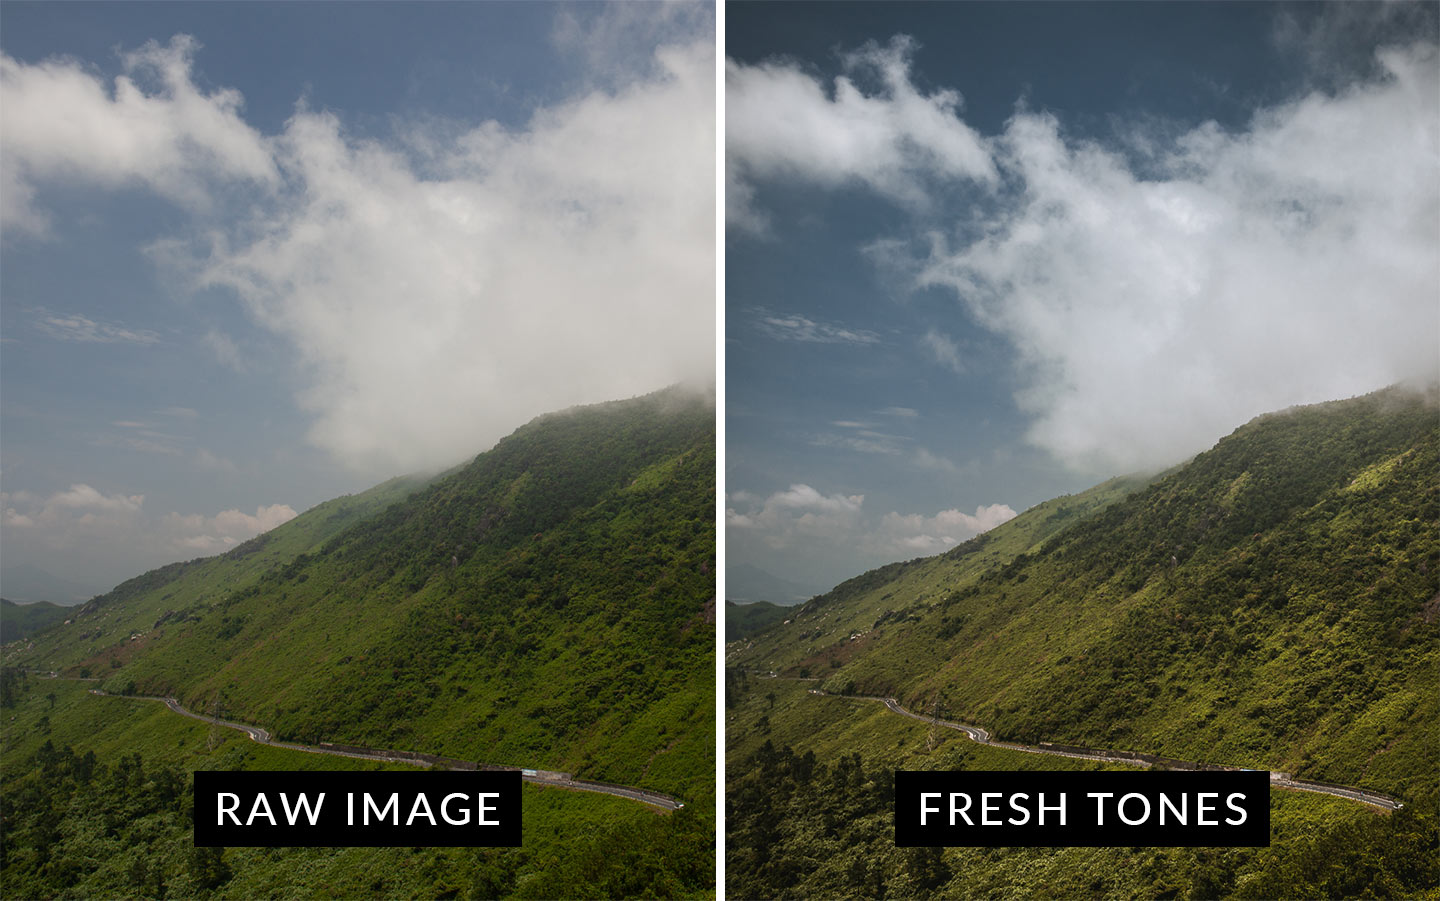 A before and after comparison showing the Fresh Tones preset which is included in this moody Lightroom presets package.